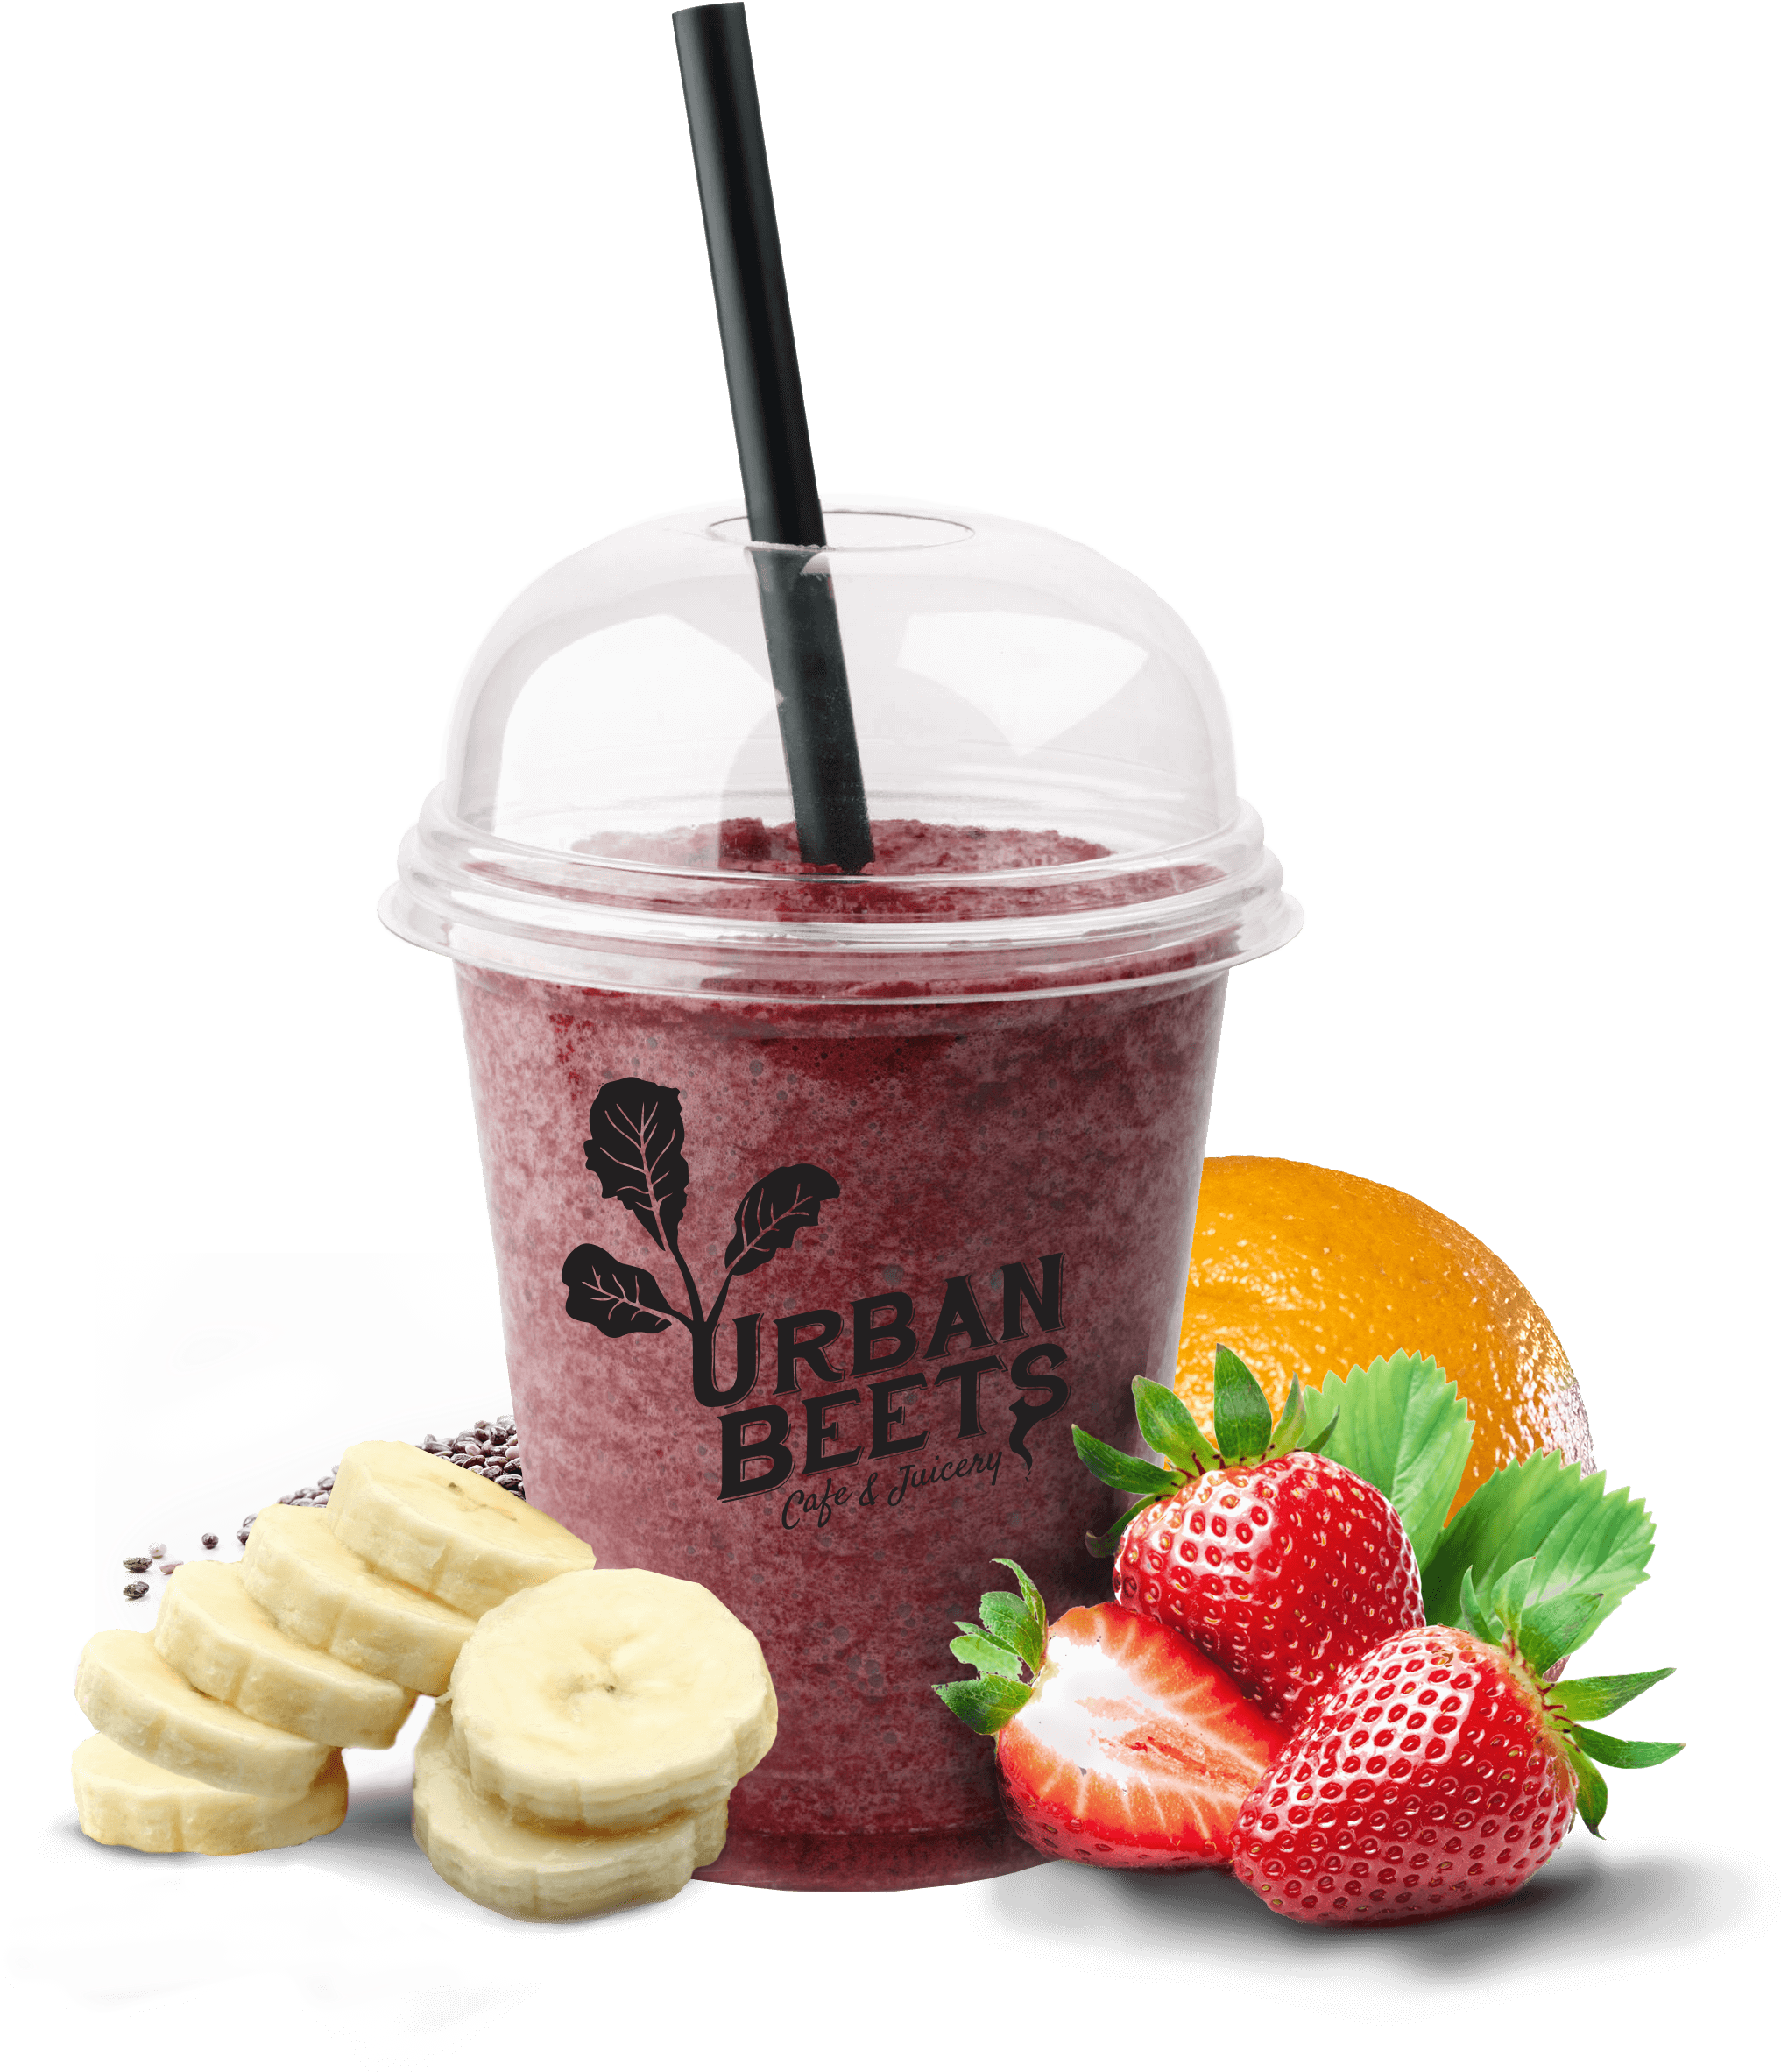 Download ‍‍‍banana - Urban Beets Cafe & Juicery PNG Image with No ...